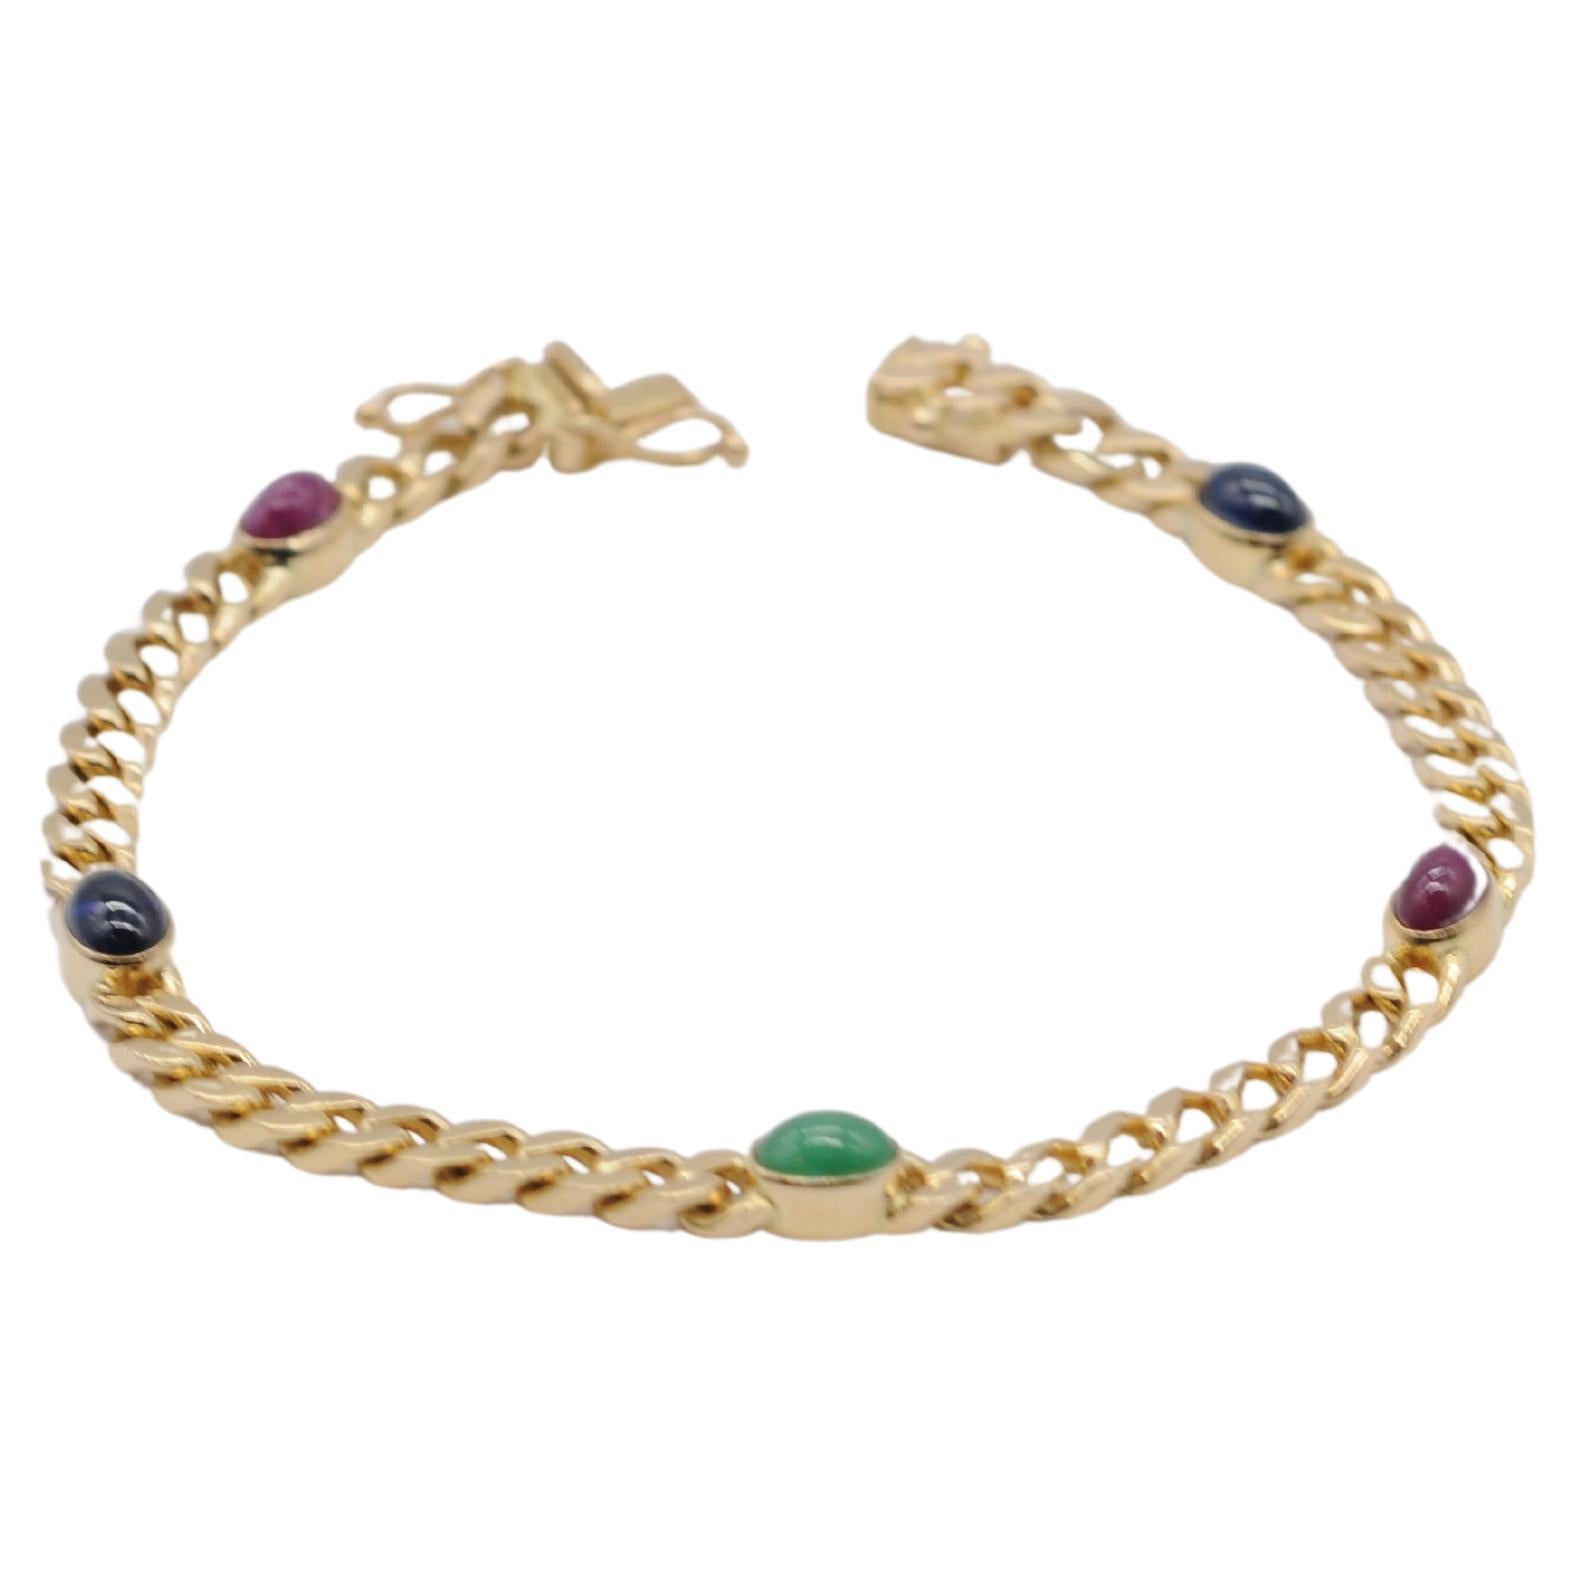 Noble 14k yellow gold bracelet with cabochon For Sale 7